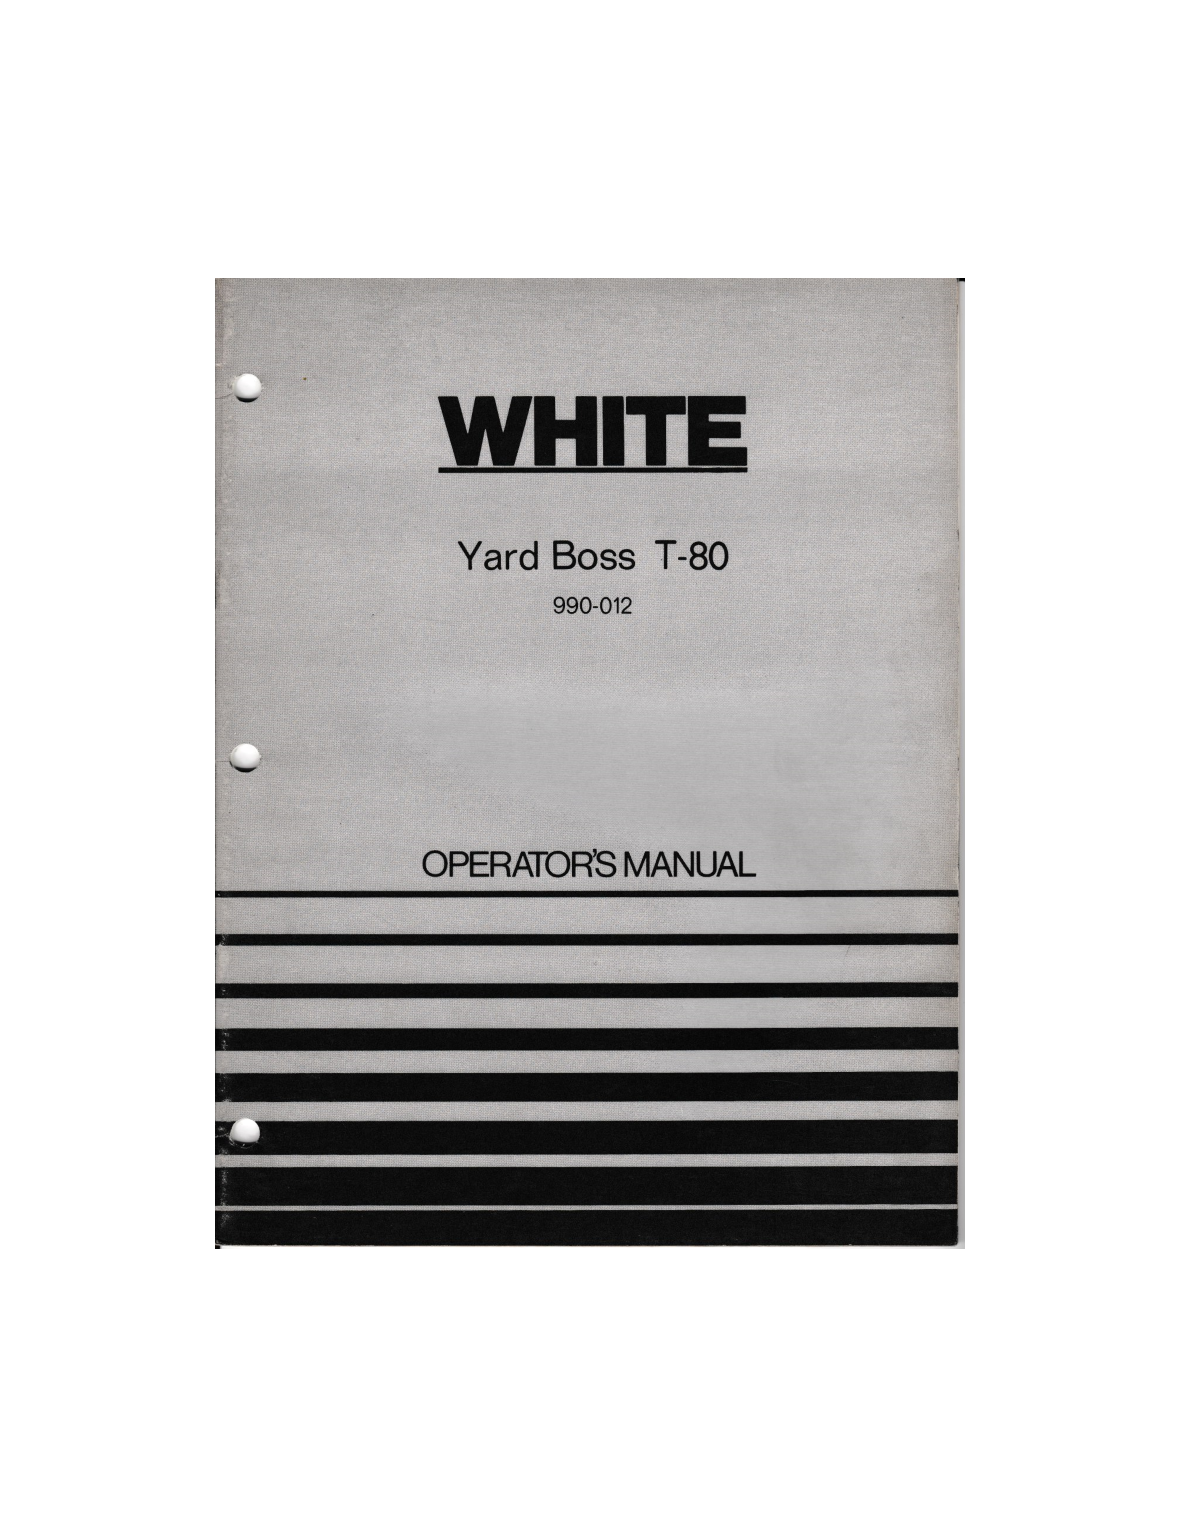 White Yard Boss T-80 Operator's Manual » Flynn's Tractor Collectibles